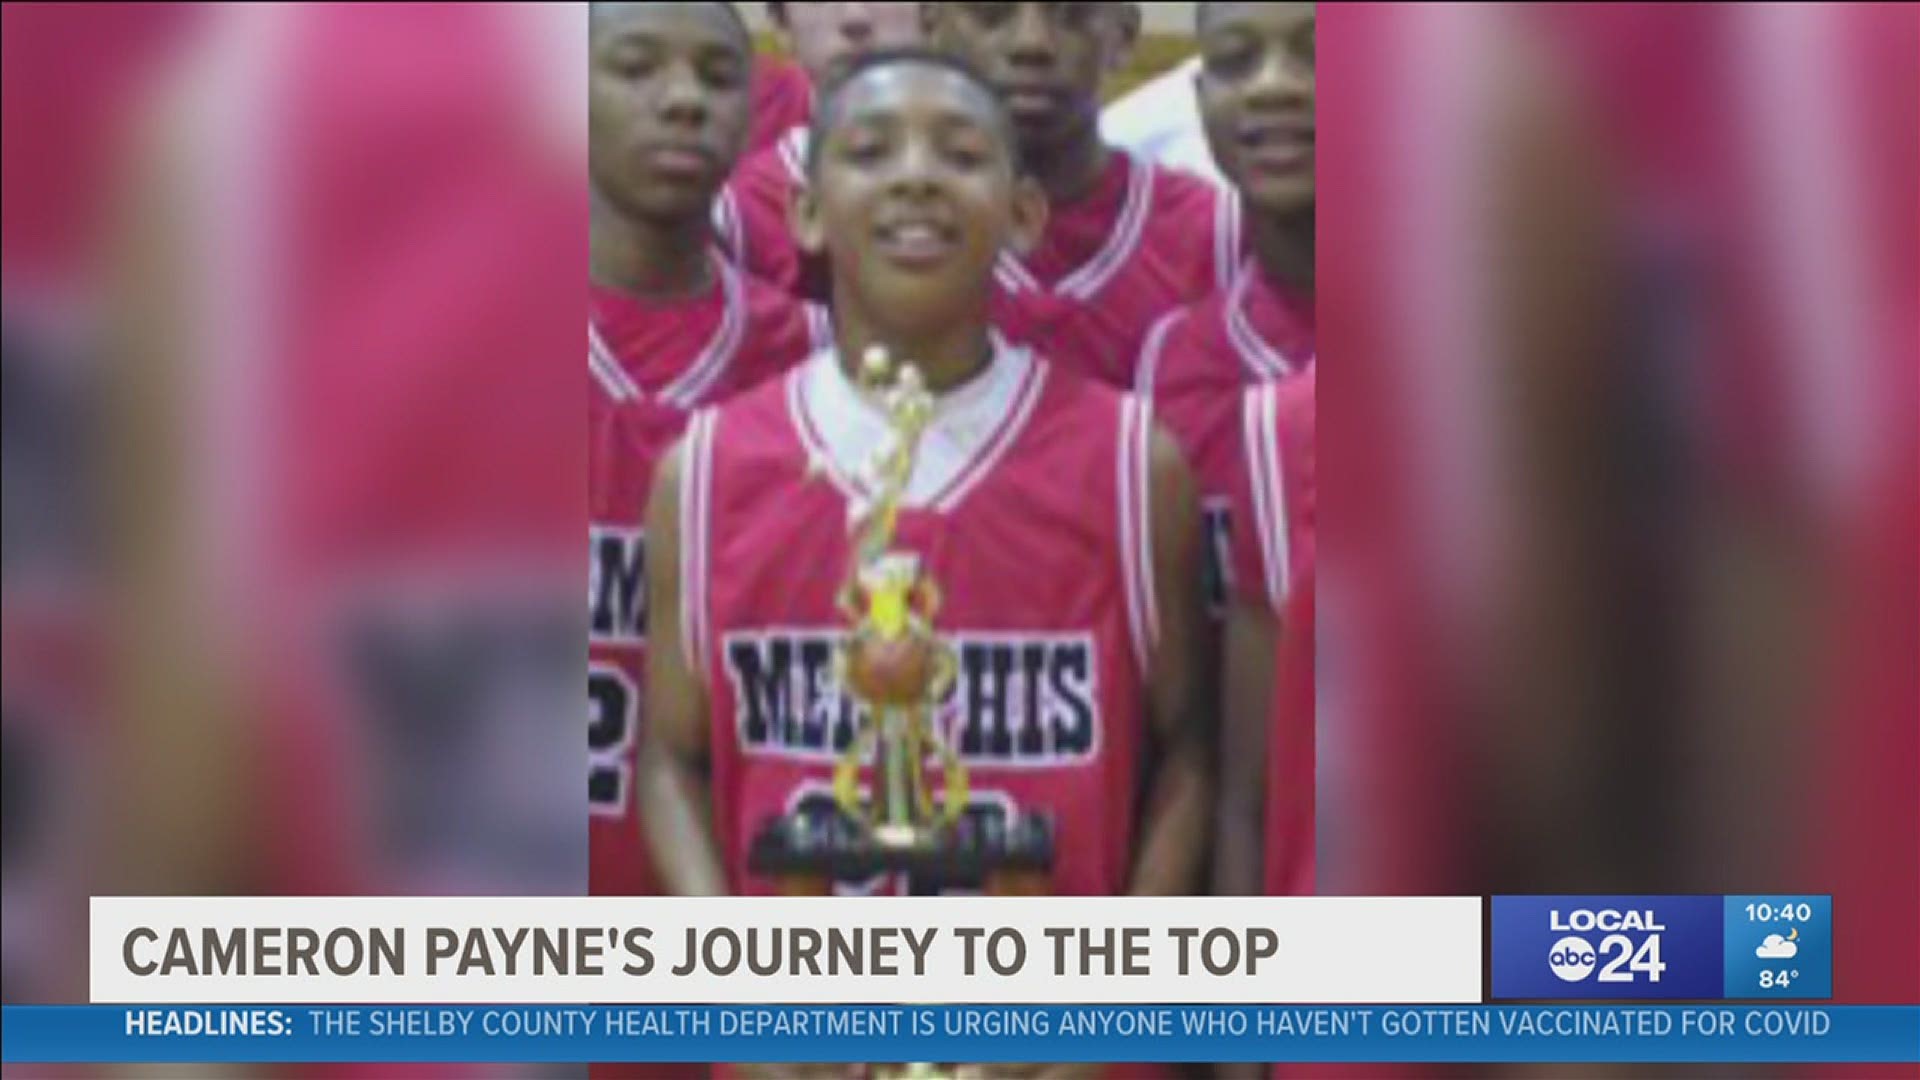 Tony Payne and Cameron Payne's former coach reflect on Cameron's ability to push through adversity in his basketball career.